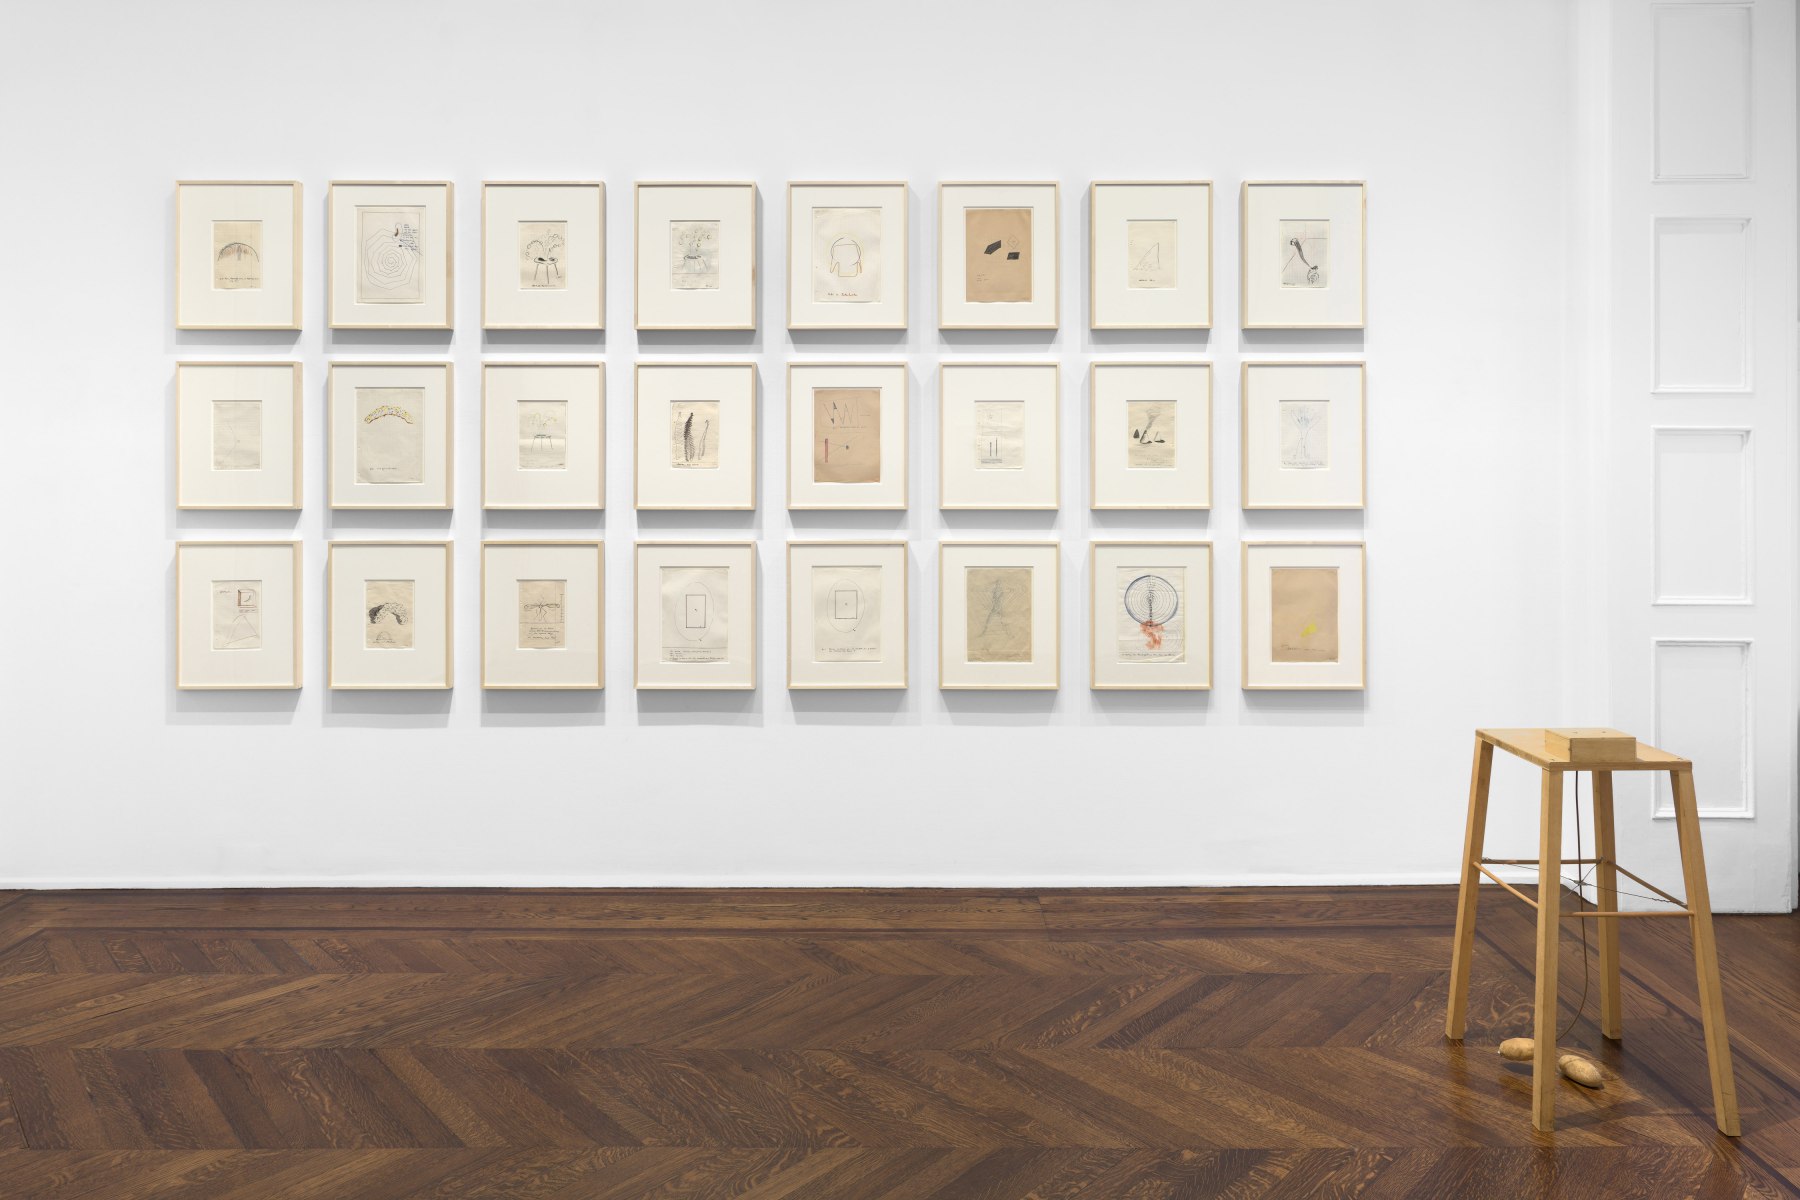 SIGMAR POLKE, Objects: Real and Imagined, 18 September - 16 November 2019 UPPER EAST SIDE, NEW YORK, Installation View 10